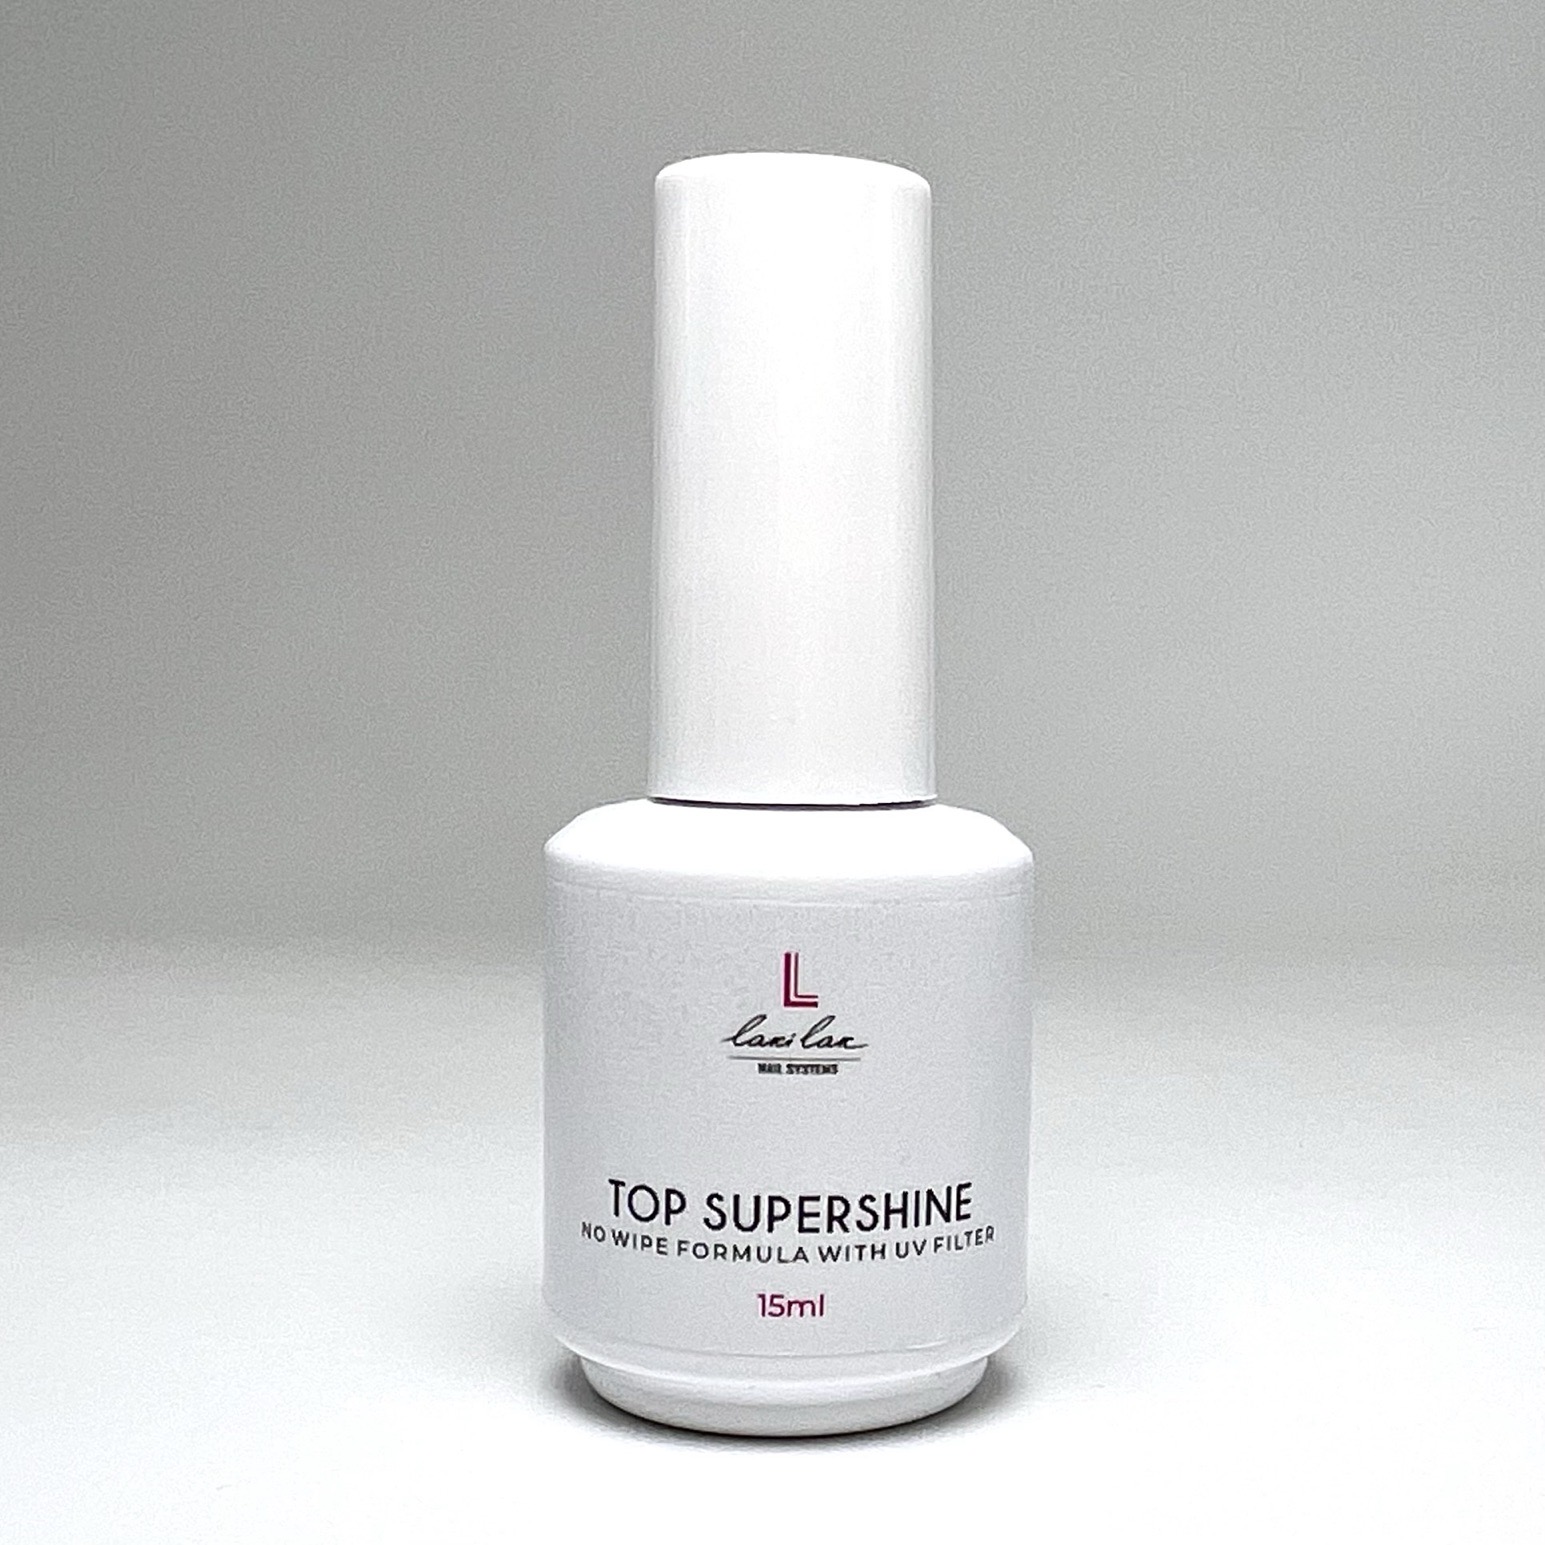 Top supershine with UV filtr